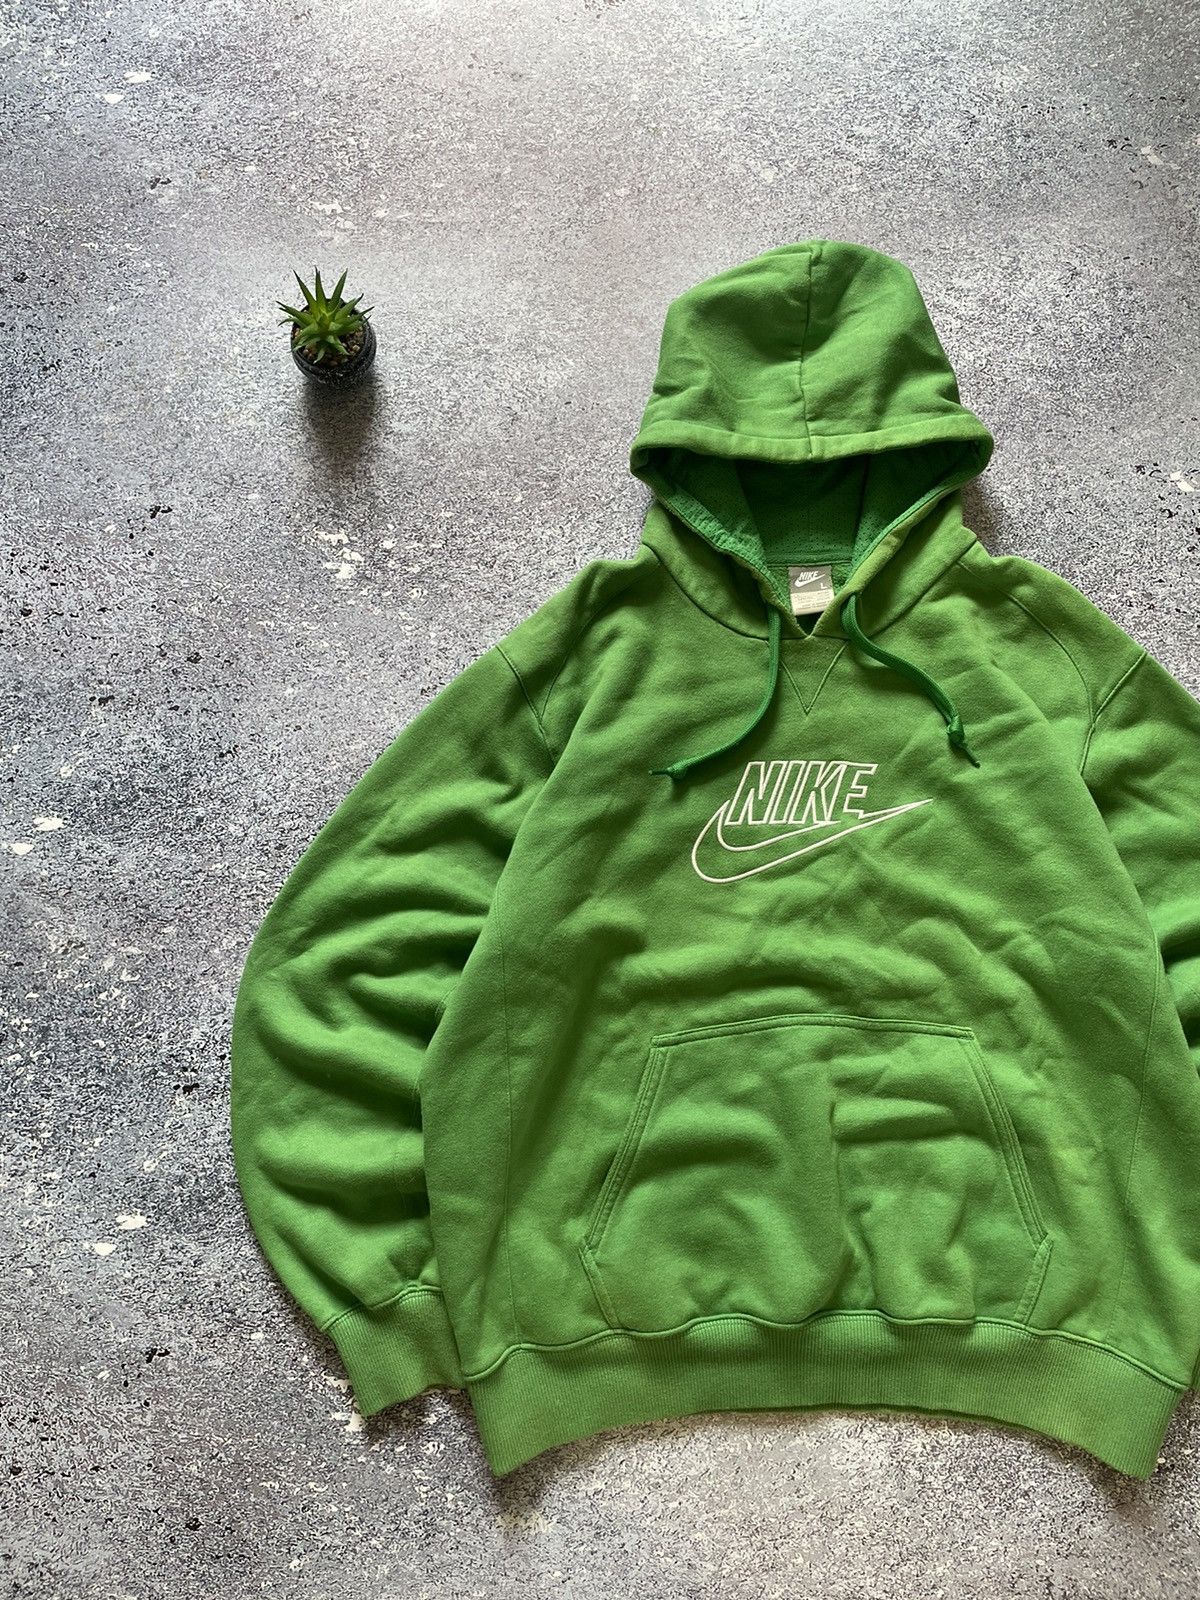 Nike Vintage Nike Hoodie Baggy Swoosh Embroidered Logo Size US L / EU 52-54 / 3 - 2 Preview